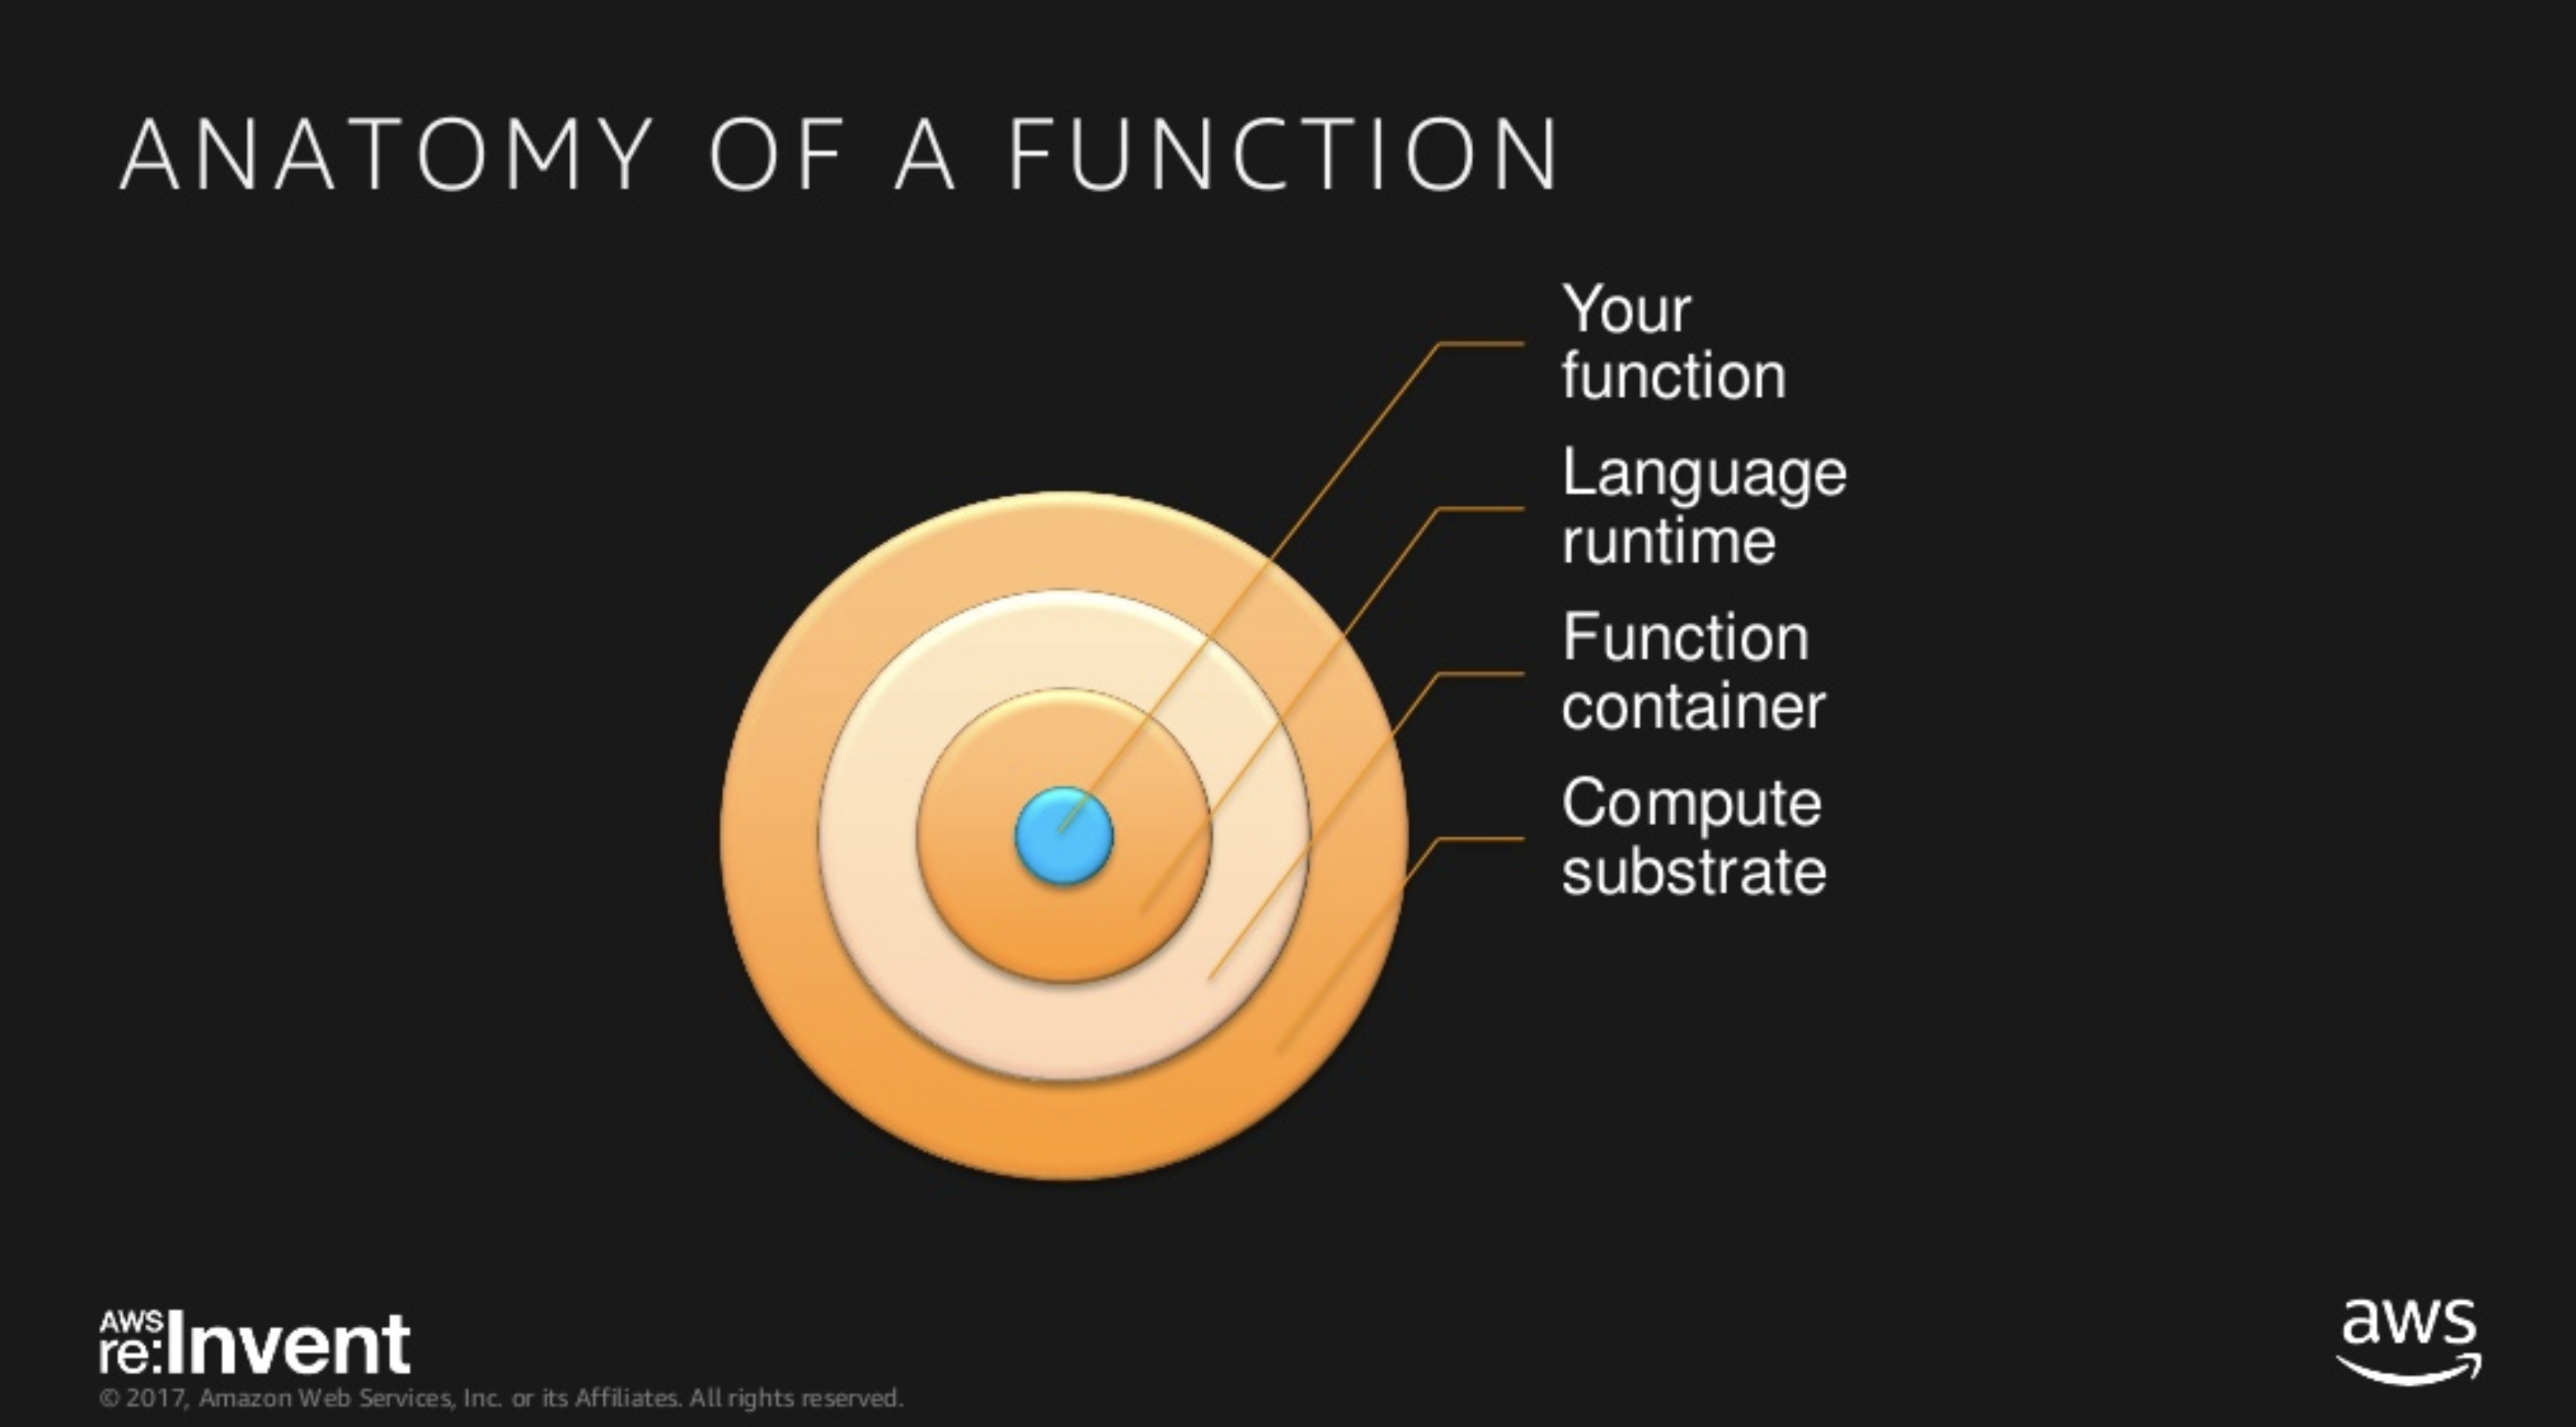 Anatomy of a Function